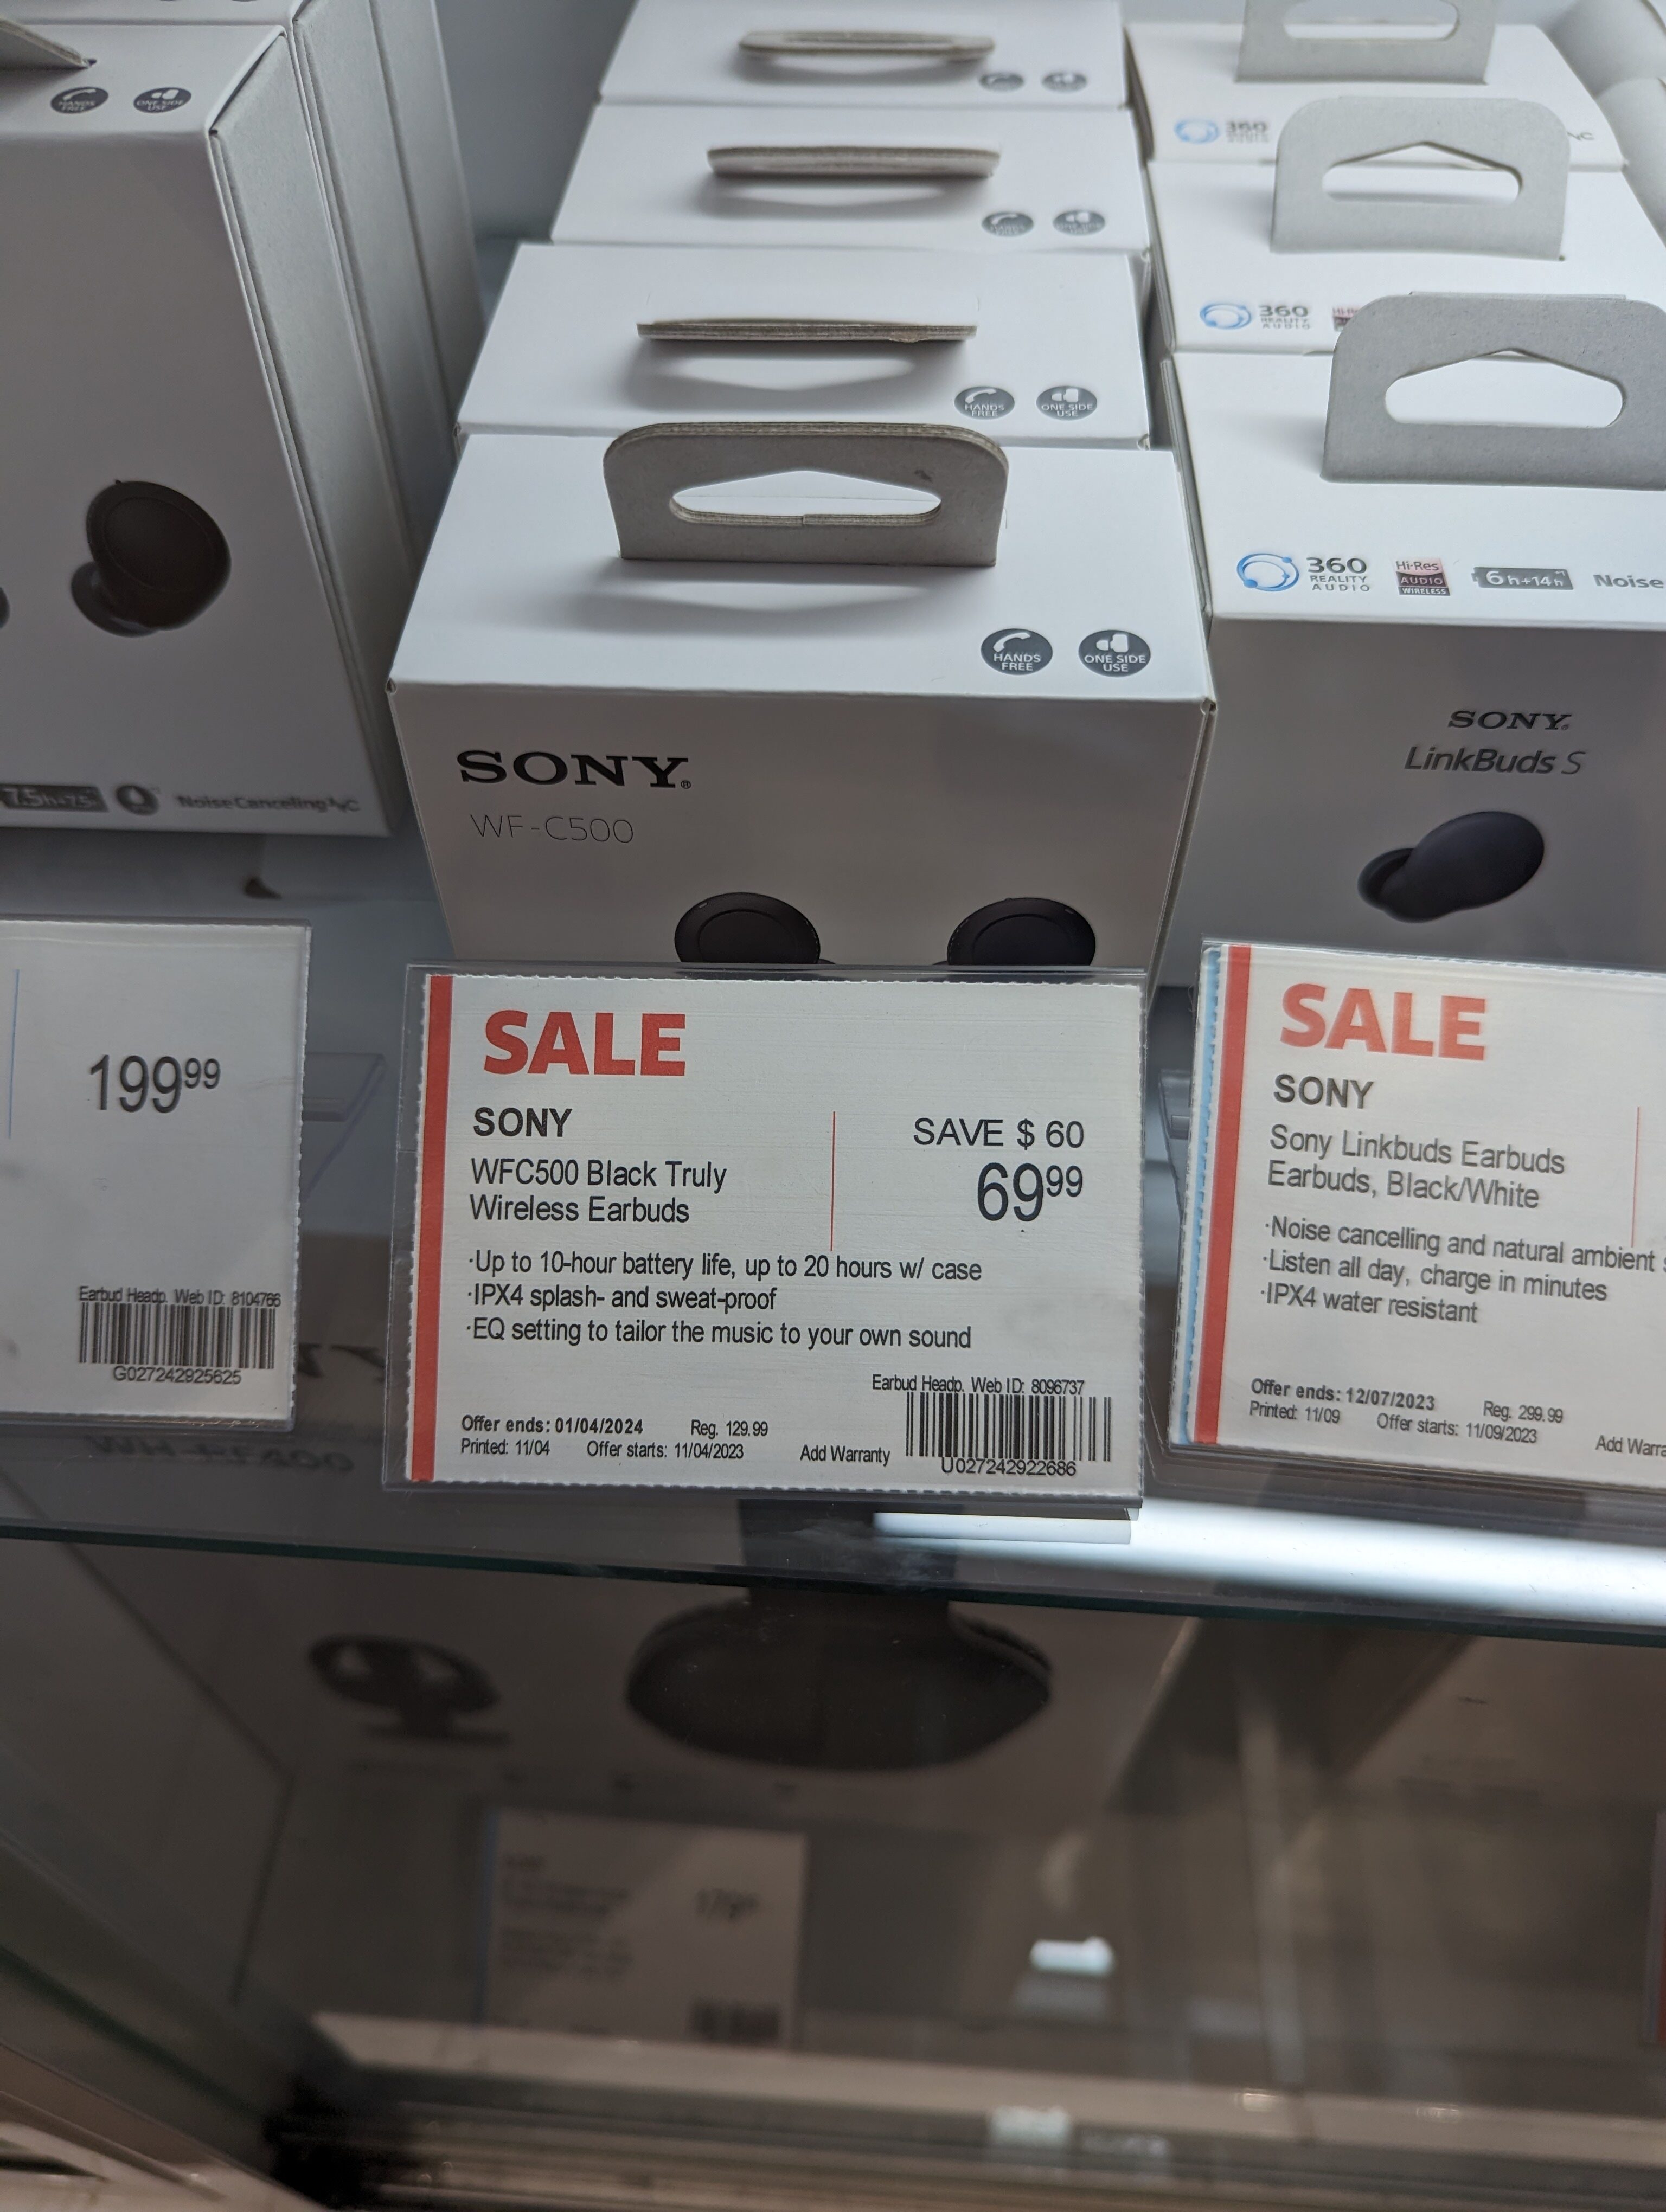 The Source] [$69.99]Sony WFC500 Black Truly Wireless. RICHMOND HILL  HILLCREST MALL LOCATION - RedFlagDeals.com Forums